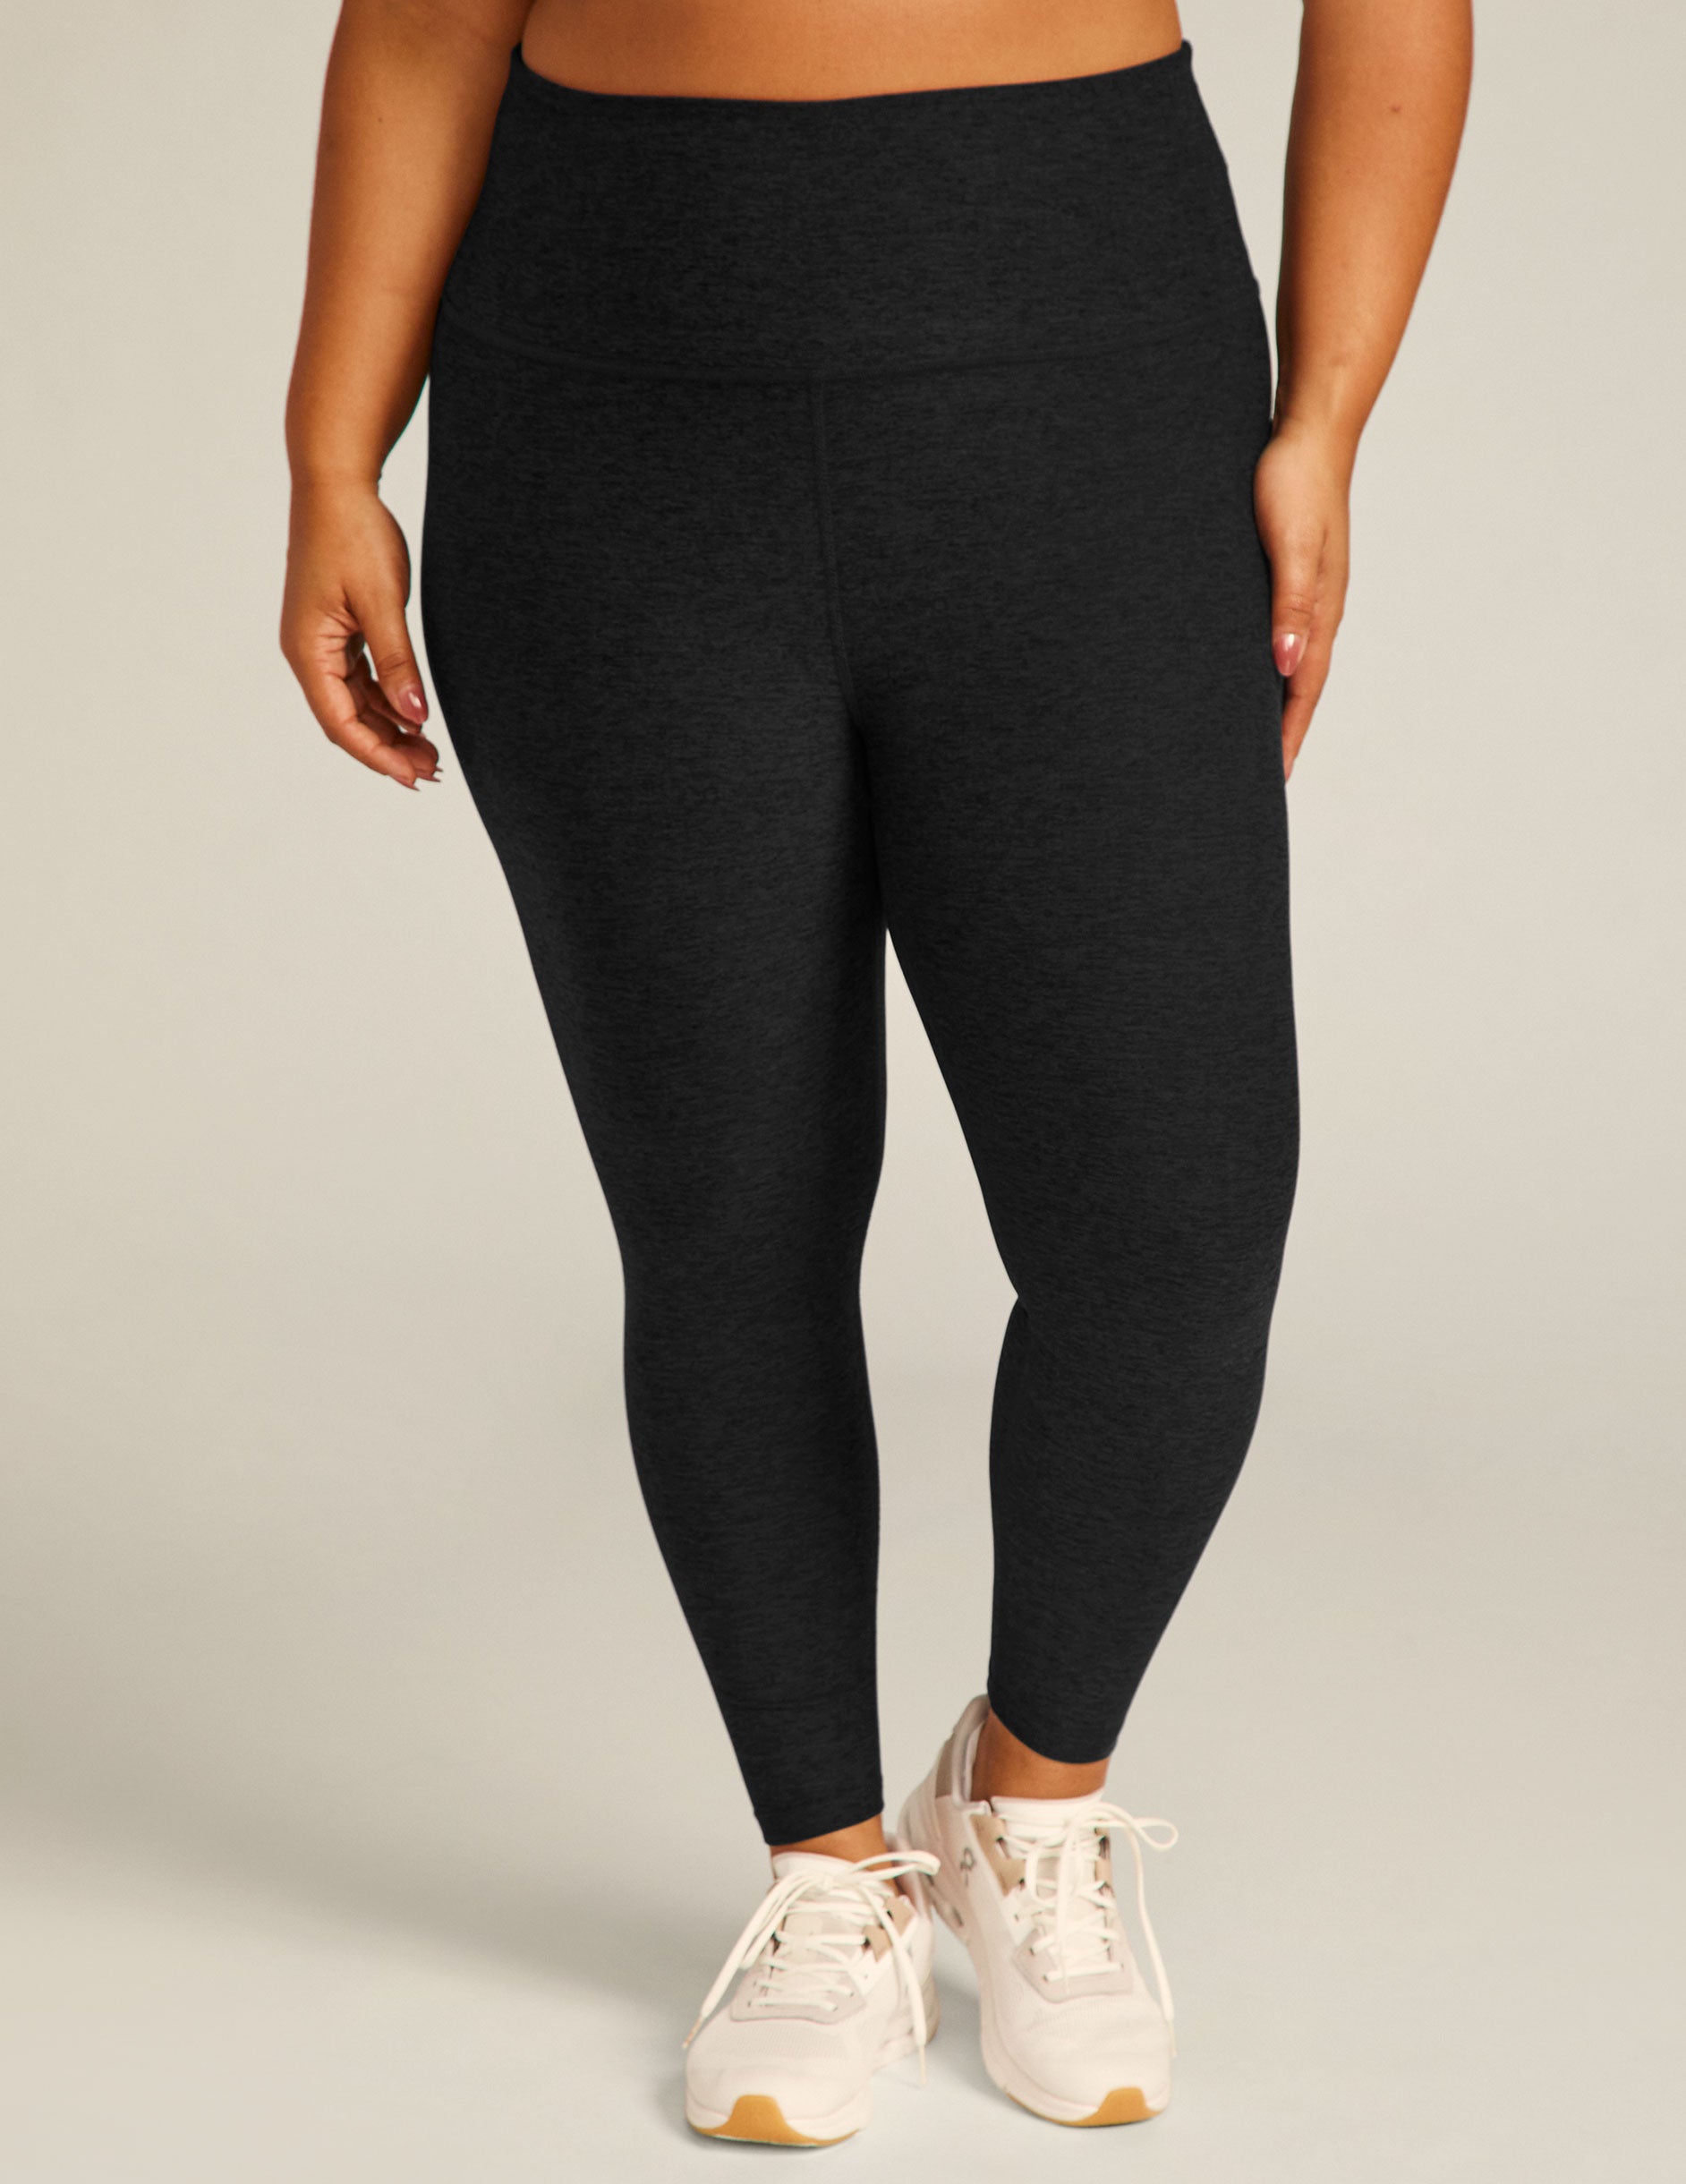 Deezi Active Maddy Leggings  Best Selling Performance Tights